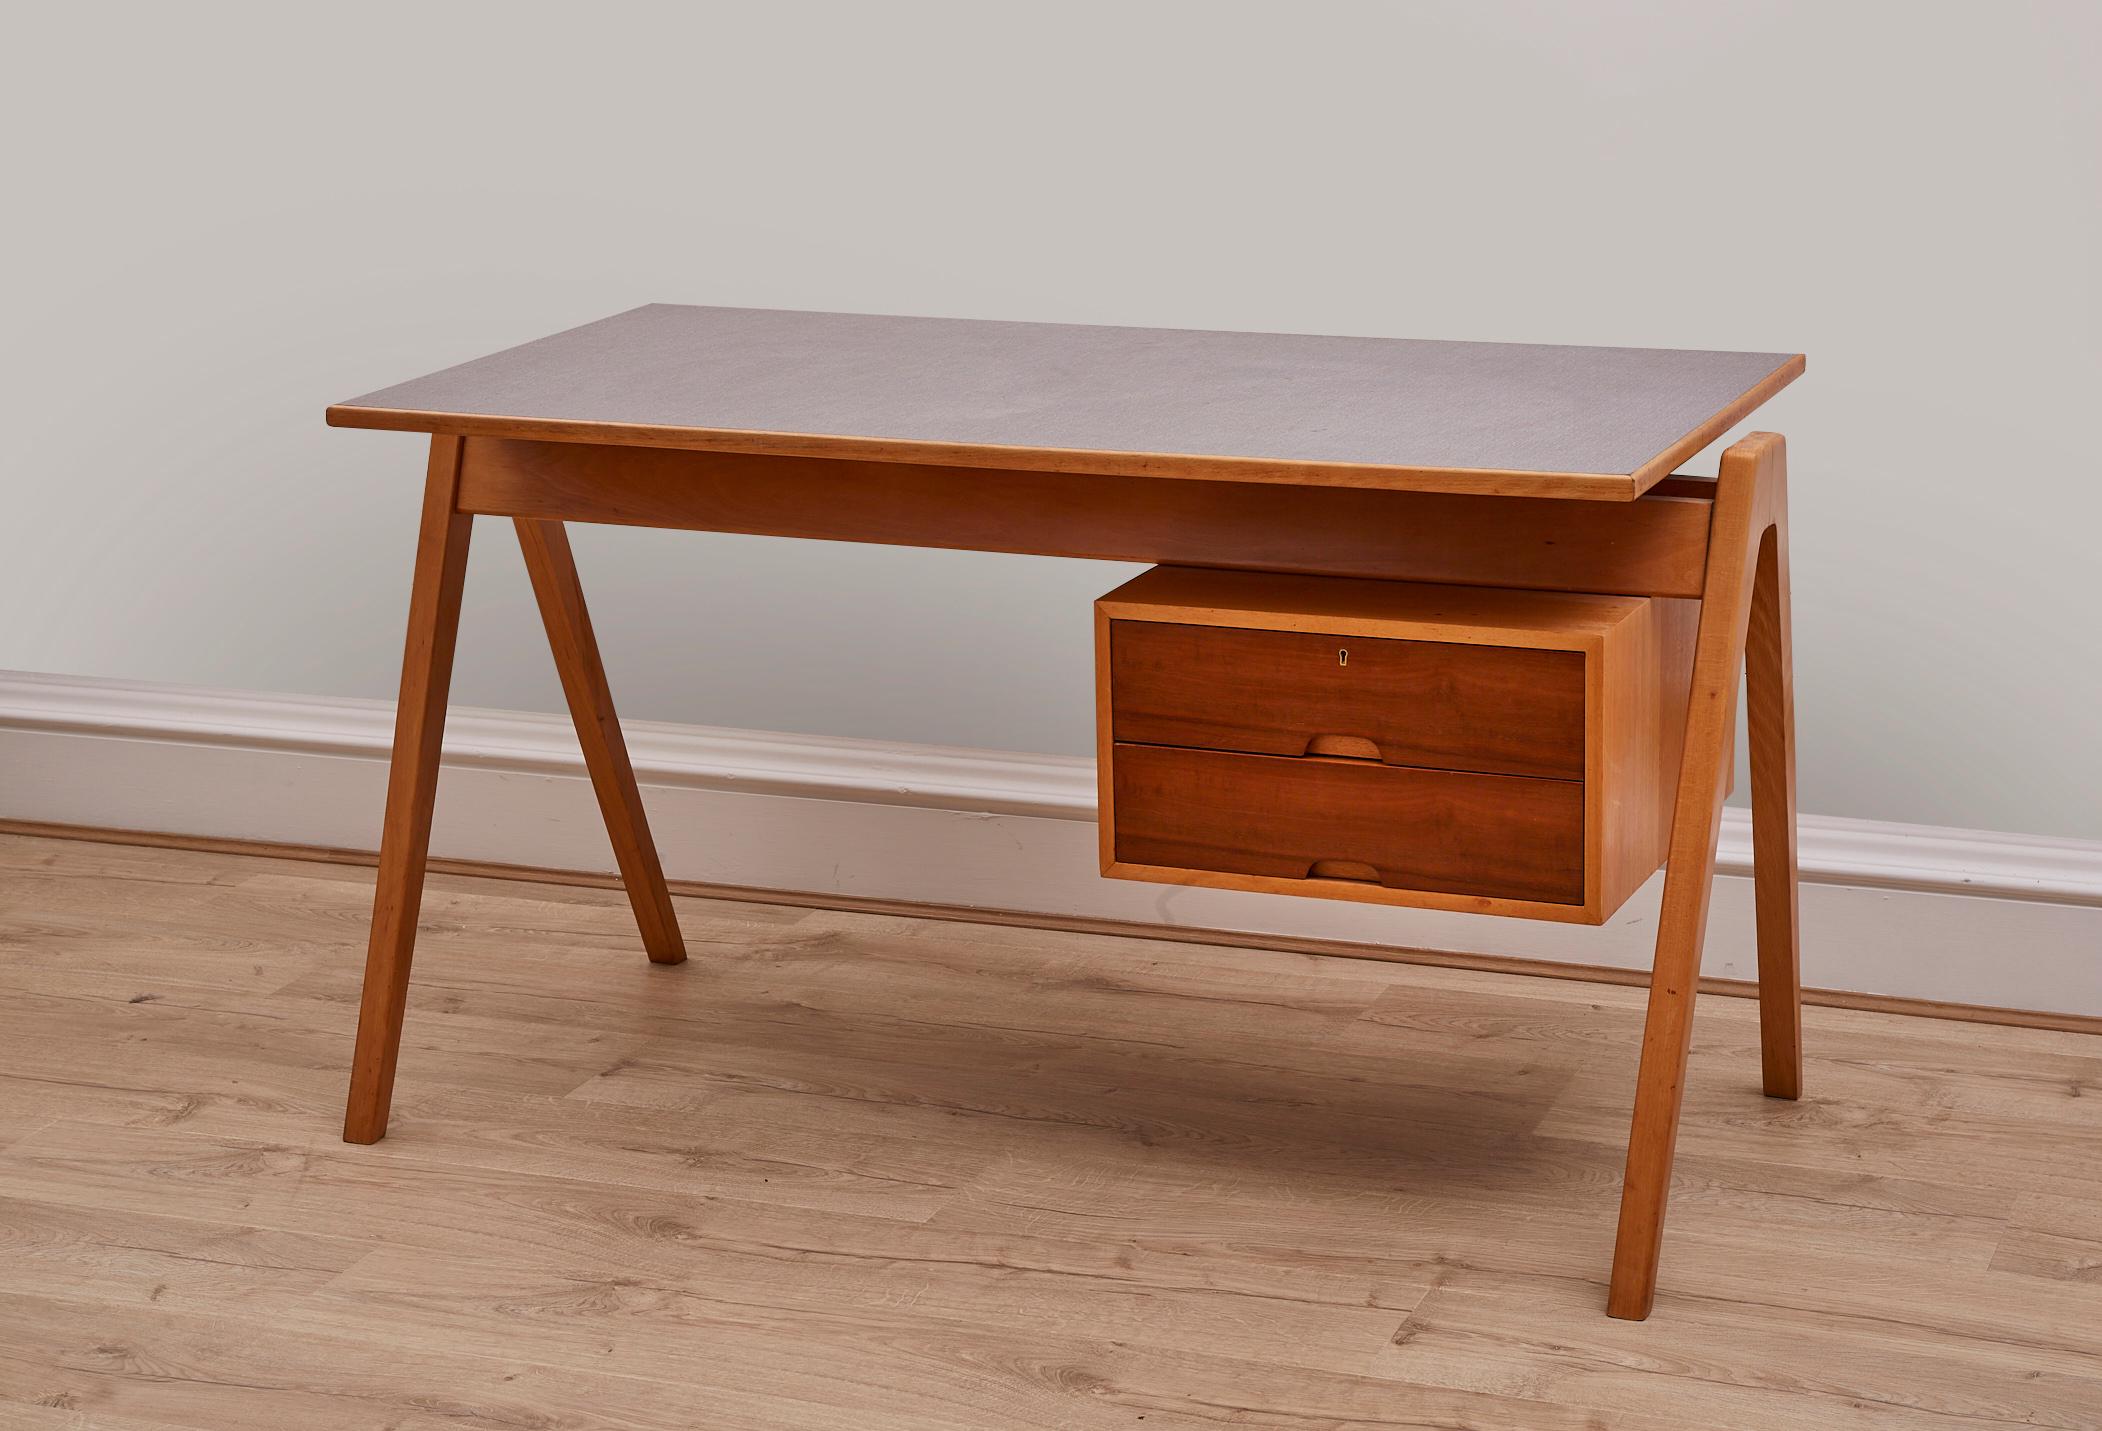 Mid-20th Century Writing Desk by Robin Day For Hillie. 1950's 